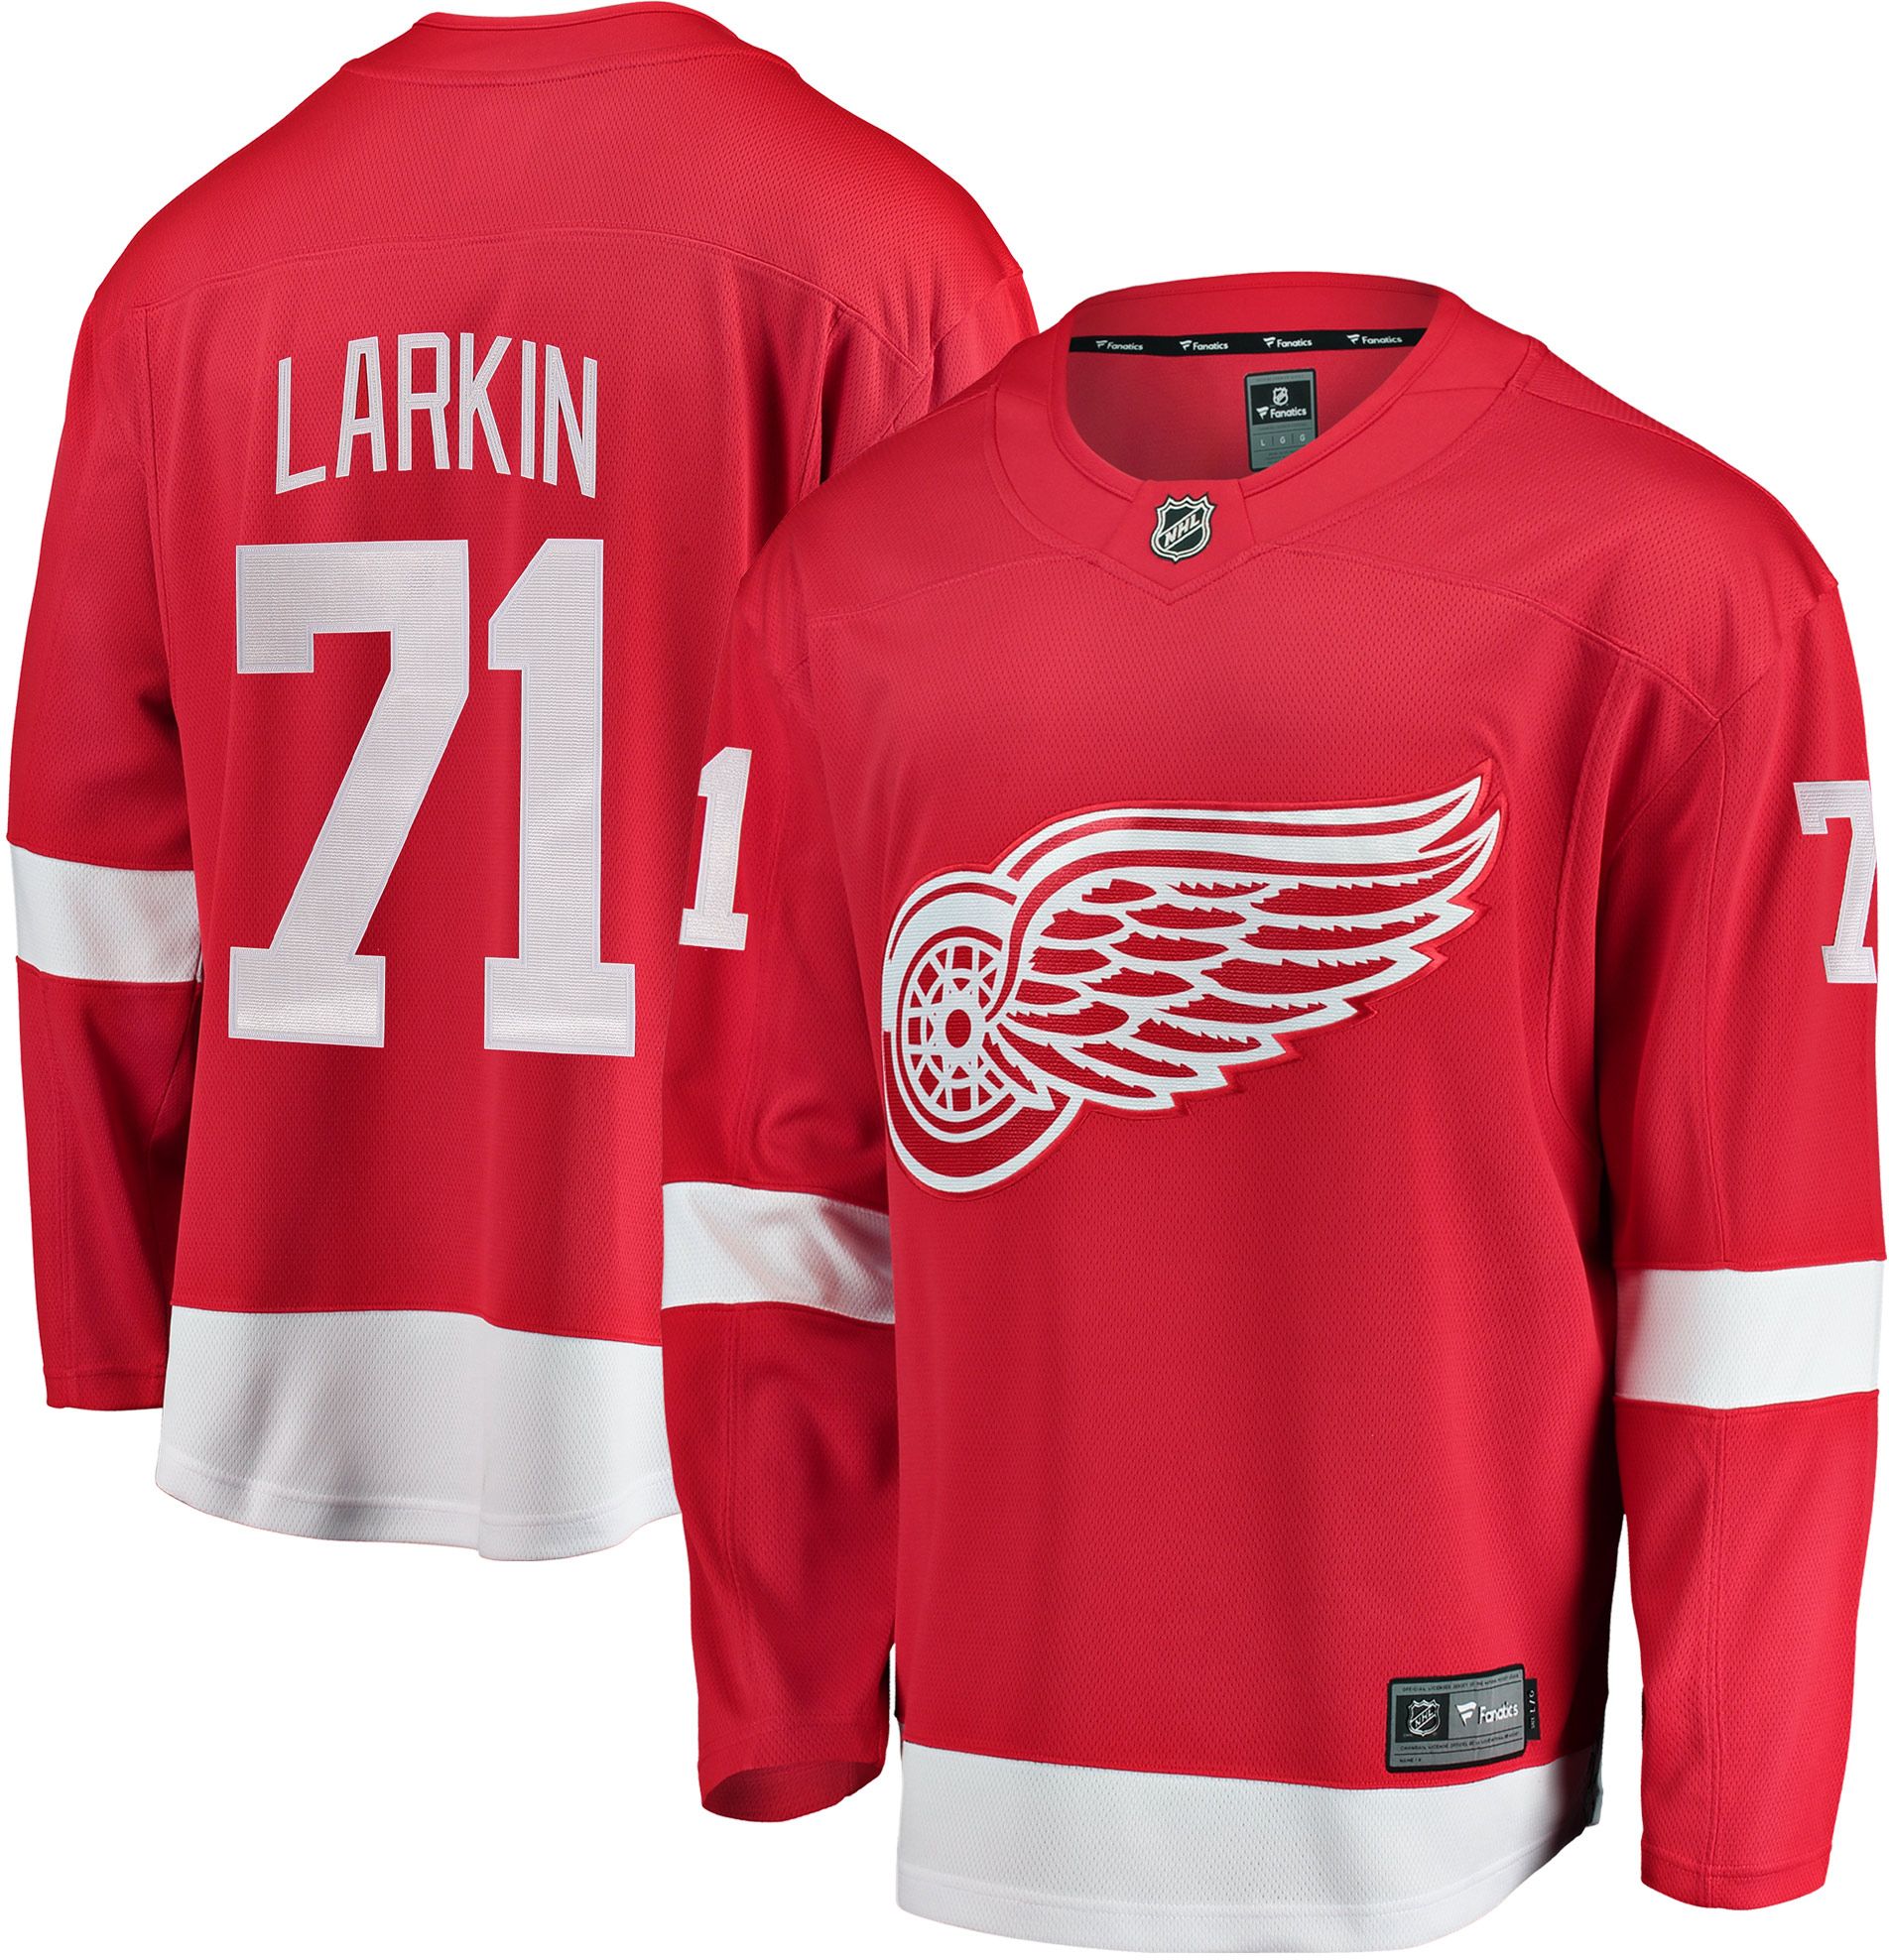 Detroit Red Wings jersey a gift from hockey gods. Here's why it's GOAT